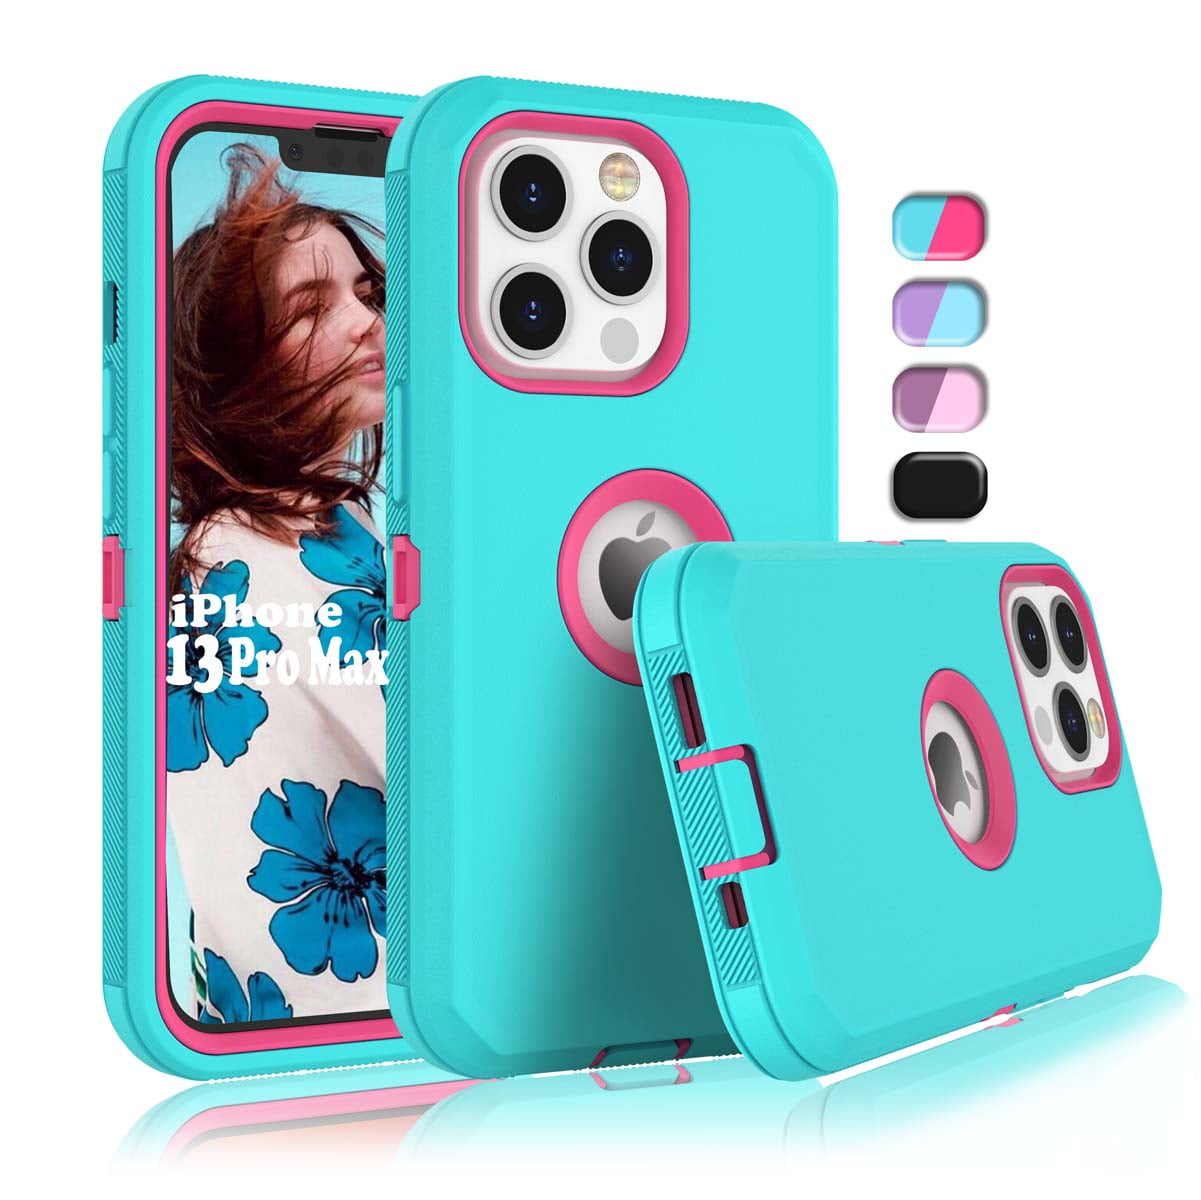 Aqua Mint/Pink FYSZBOX for iPhone 13 Pro 6.1 Case Triple Layer Shockproof Drop Proof Heavy Duty Full Body Rugged Protection Phone Case Cover for Apple iPhone 13 Pro